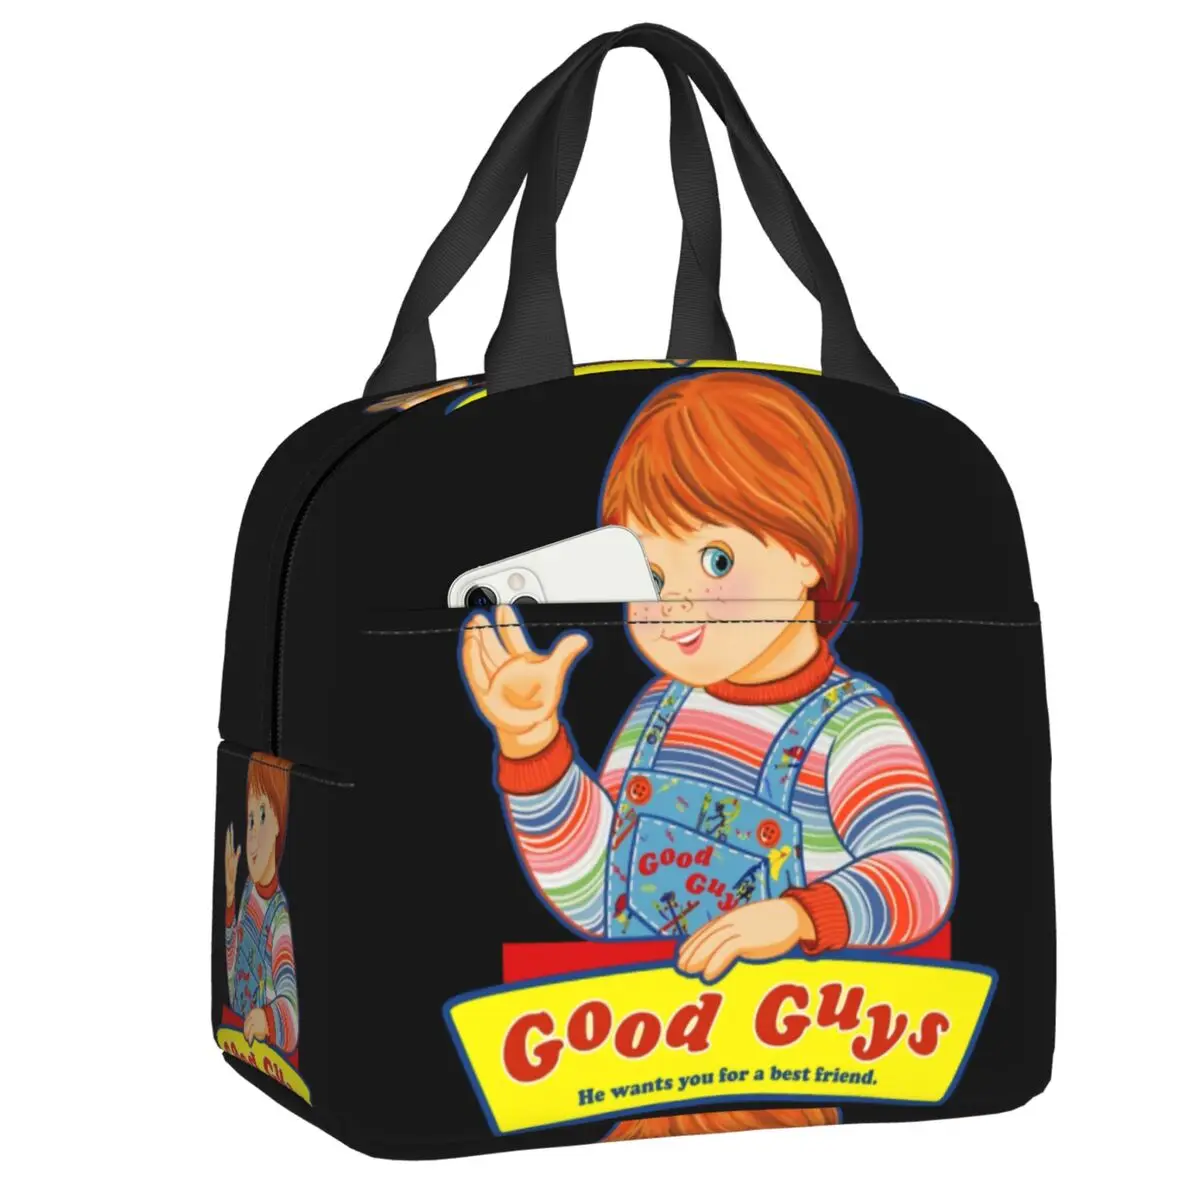 Chucky's Gym Good Guys Insulated Lunch Bag for Women Waterproof Chucky Doll Cooler Thermal Lunch Box Beach Camping Travel